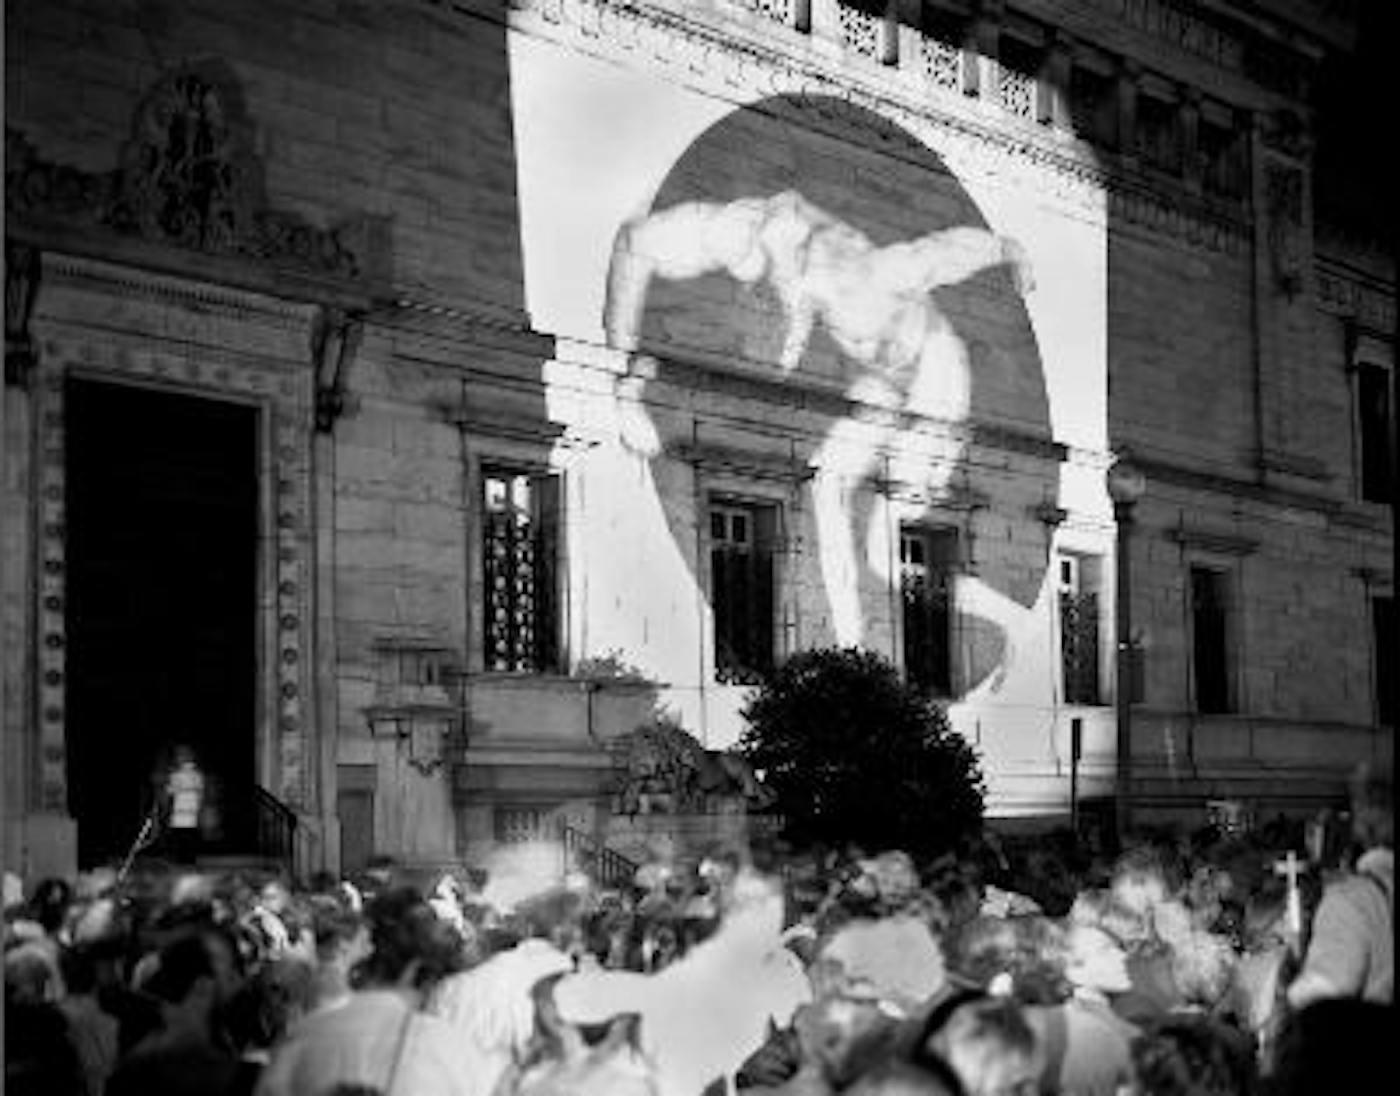 Frank Herrera, photograph of The Perfect Moment protest in which censored photographs from the show were projected on the Corcran, June 30, 1989, Corcoran Gallery of Art, Washington, D.C. © Frank Herrera